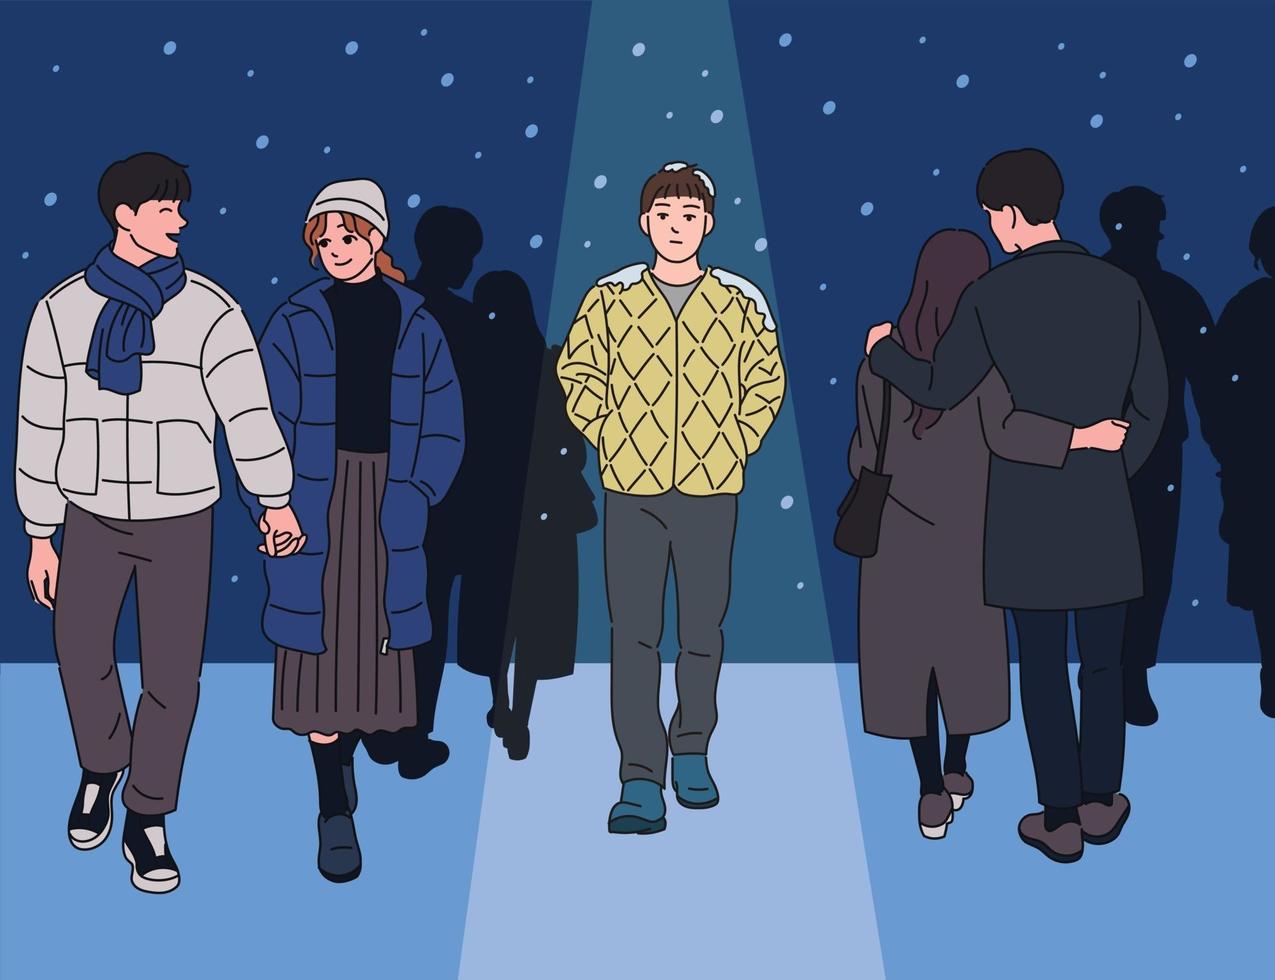 A man walking alone in a snowy night among couples. hand drawn style vector design illustrations.